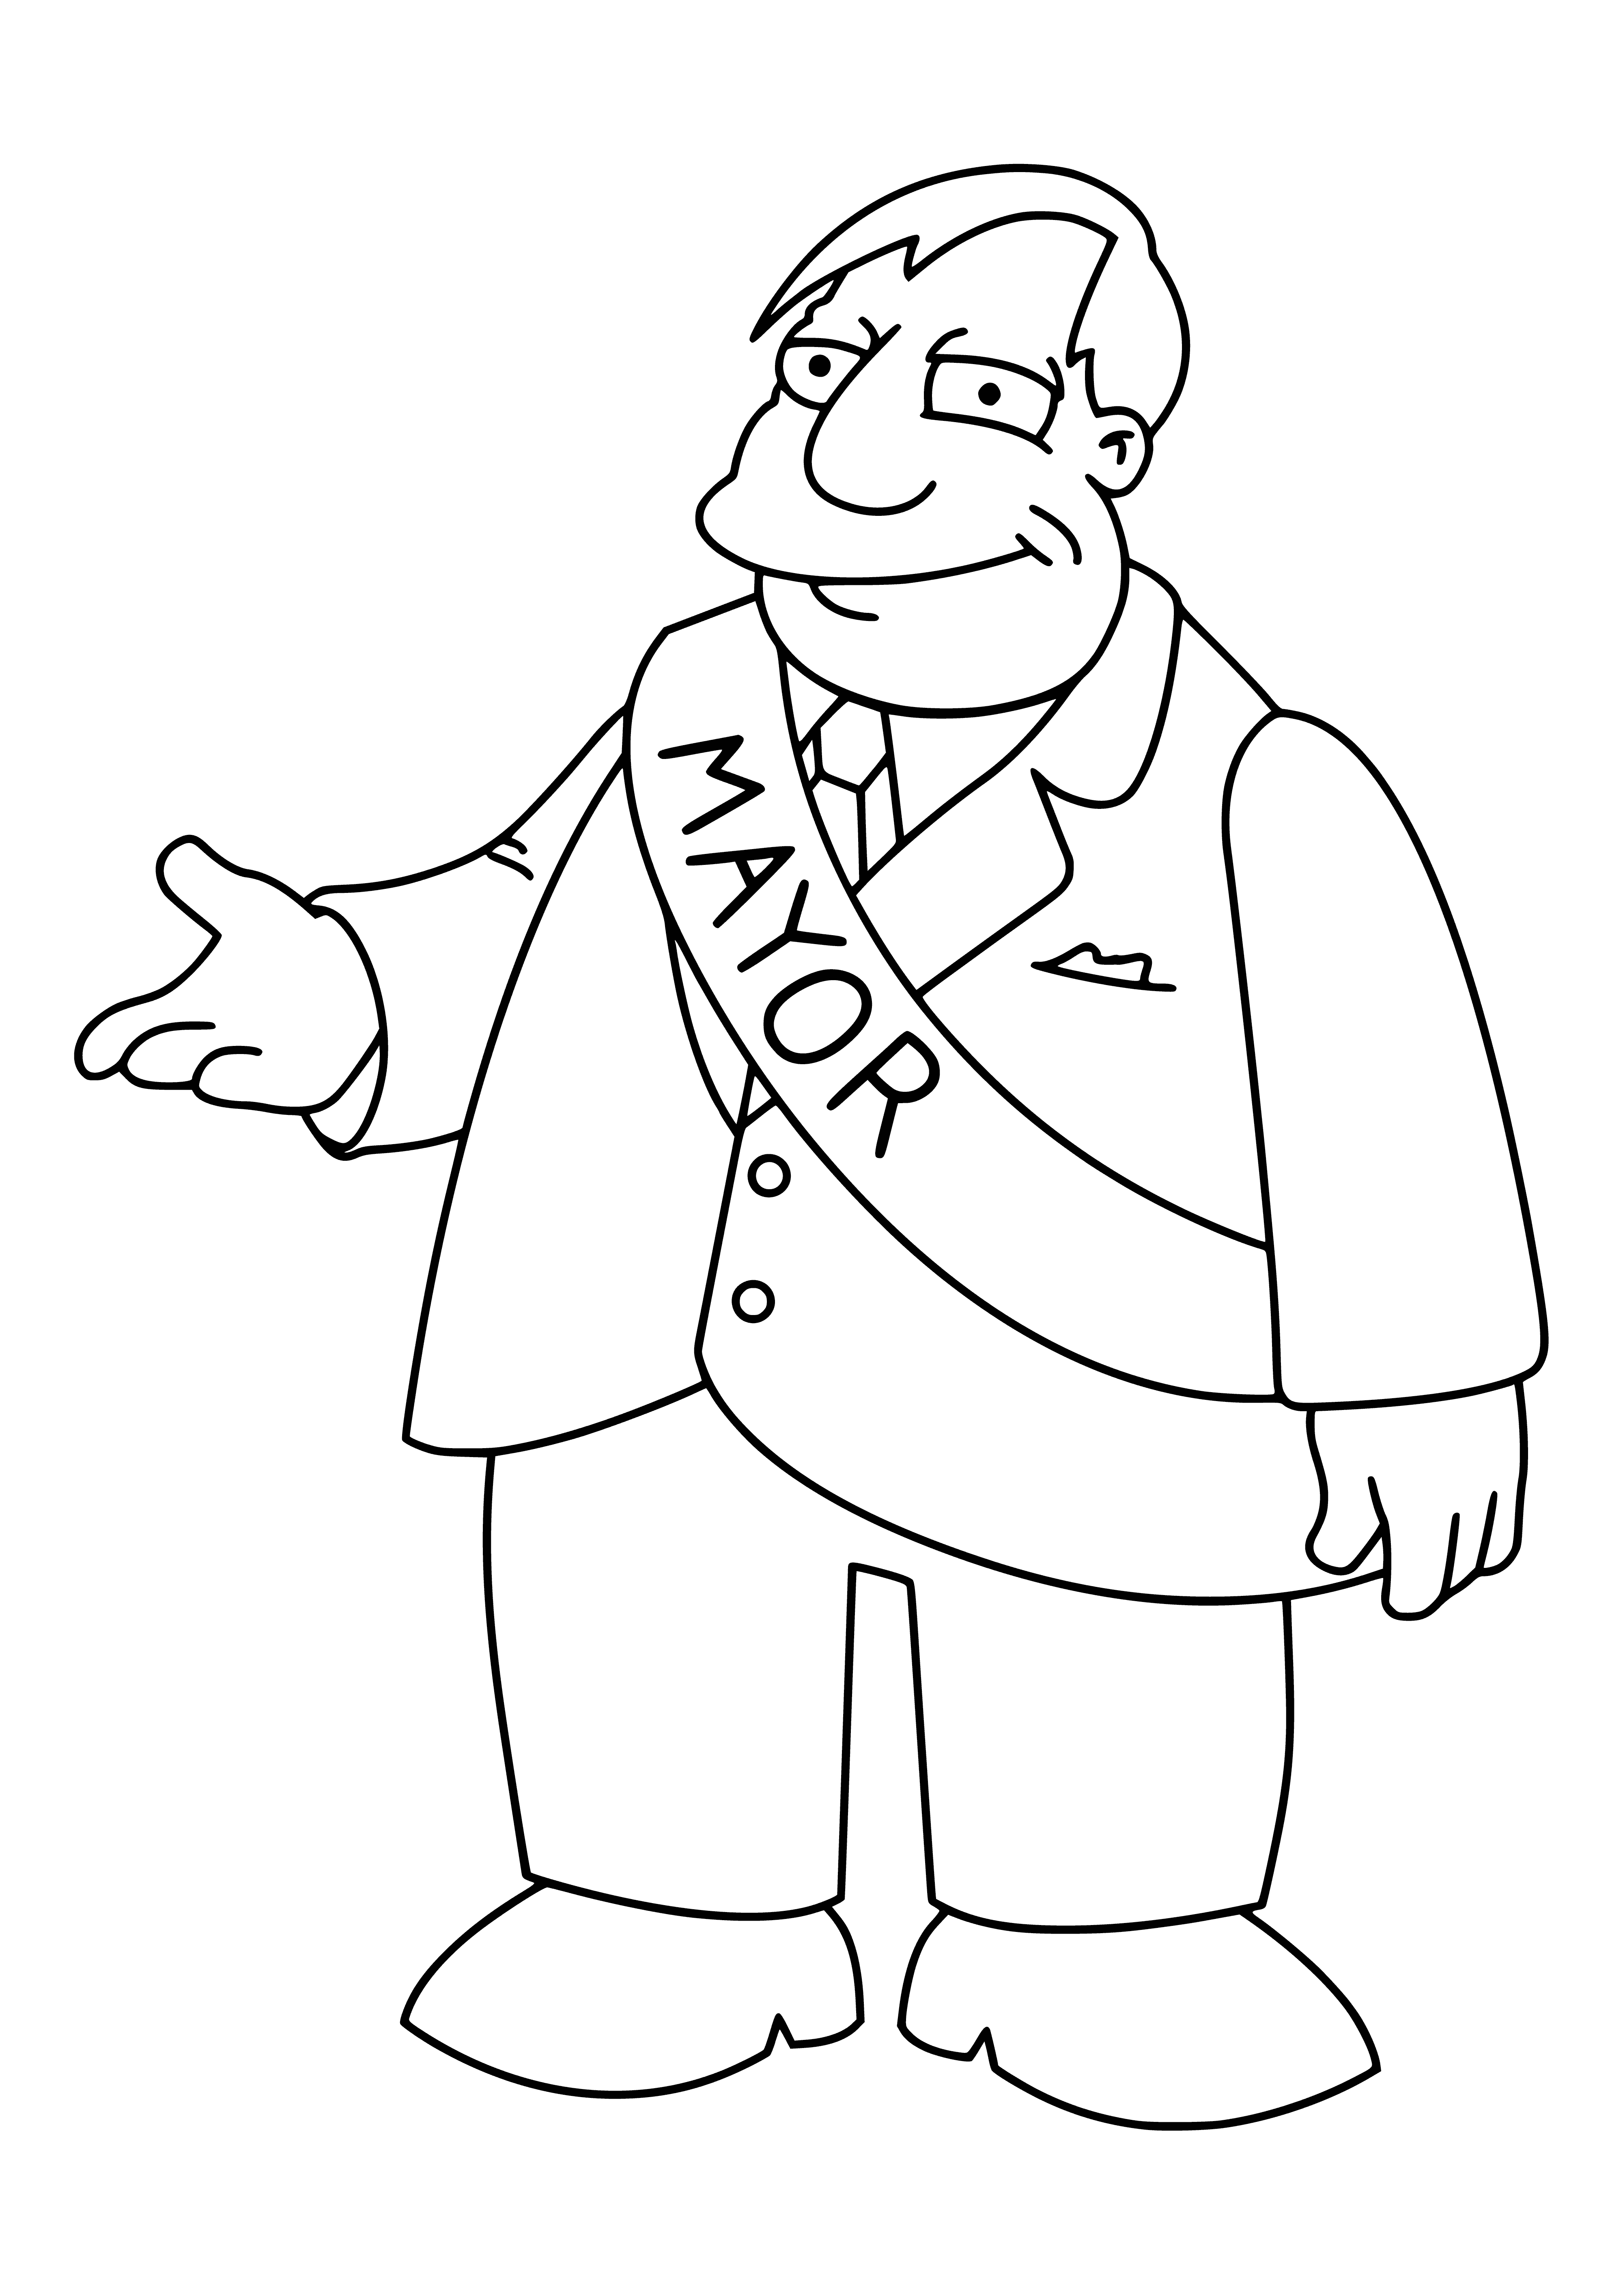 coloring page: Mayor Quimby is a suave suited man of power, seen from a desk overlooking the city his portrait displayed behind him.